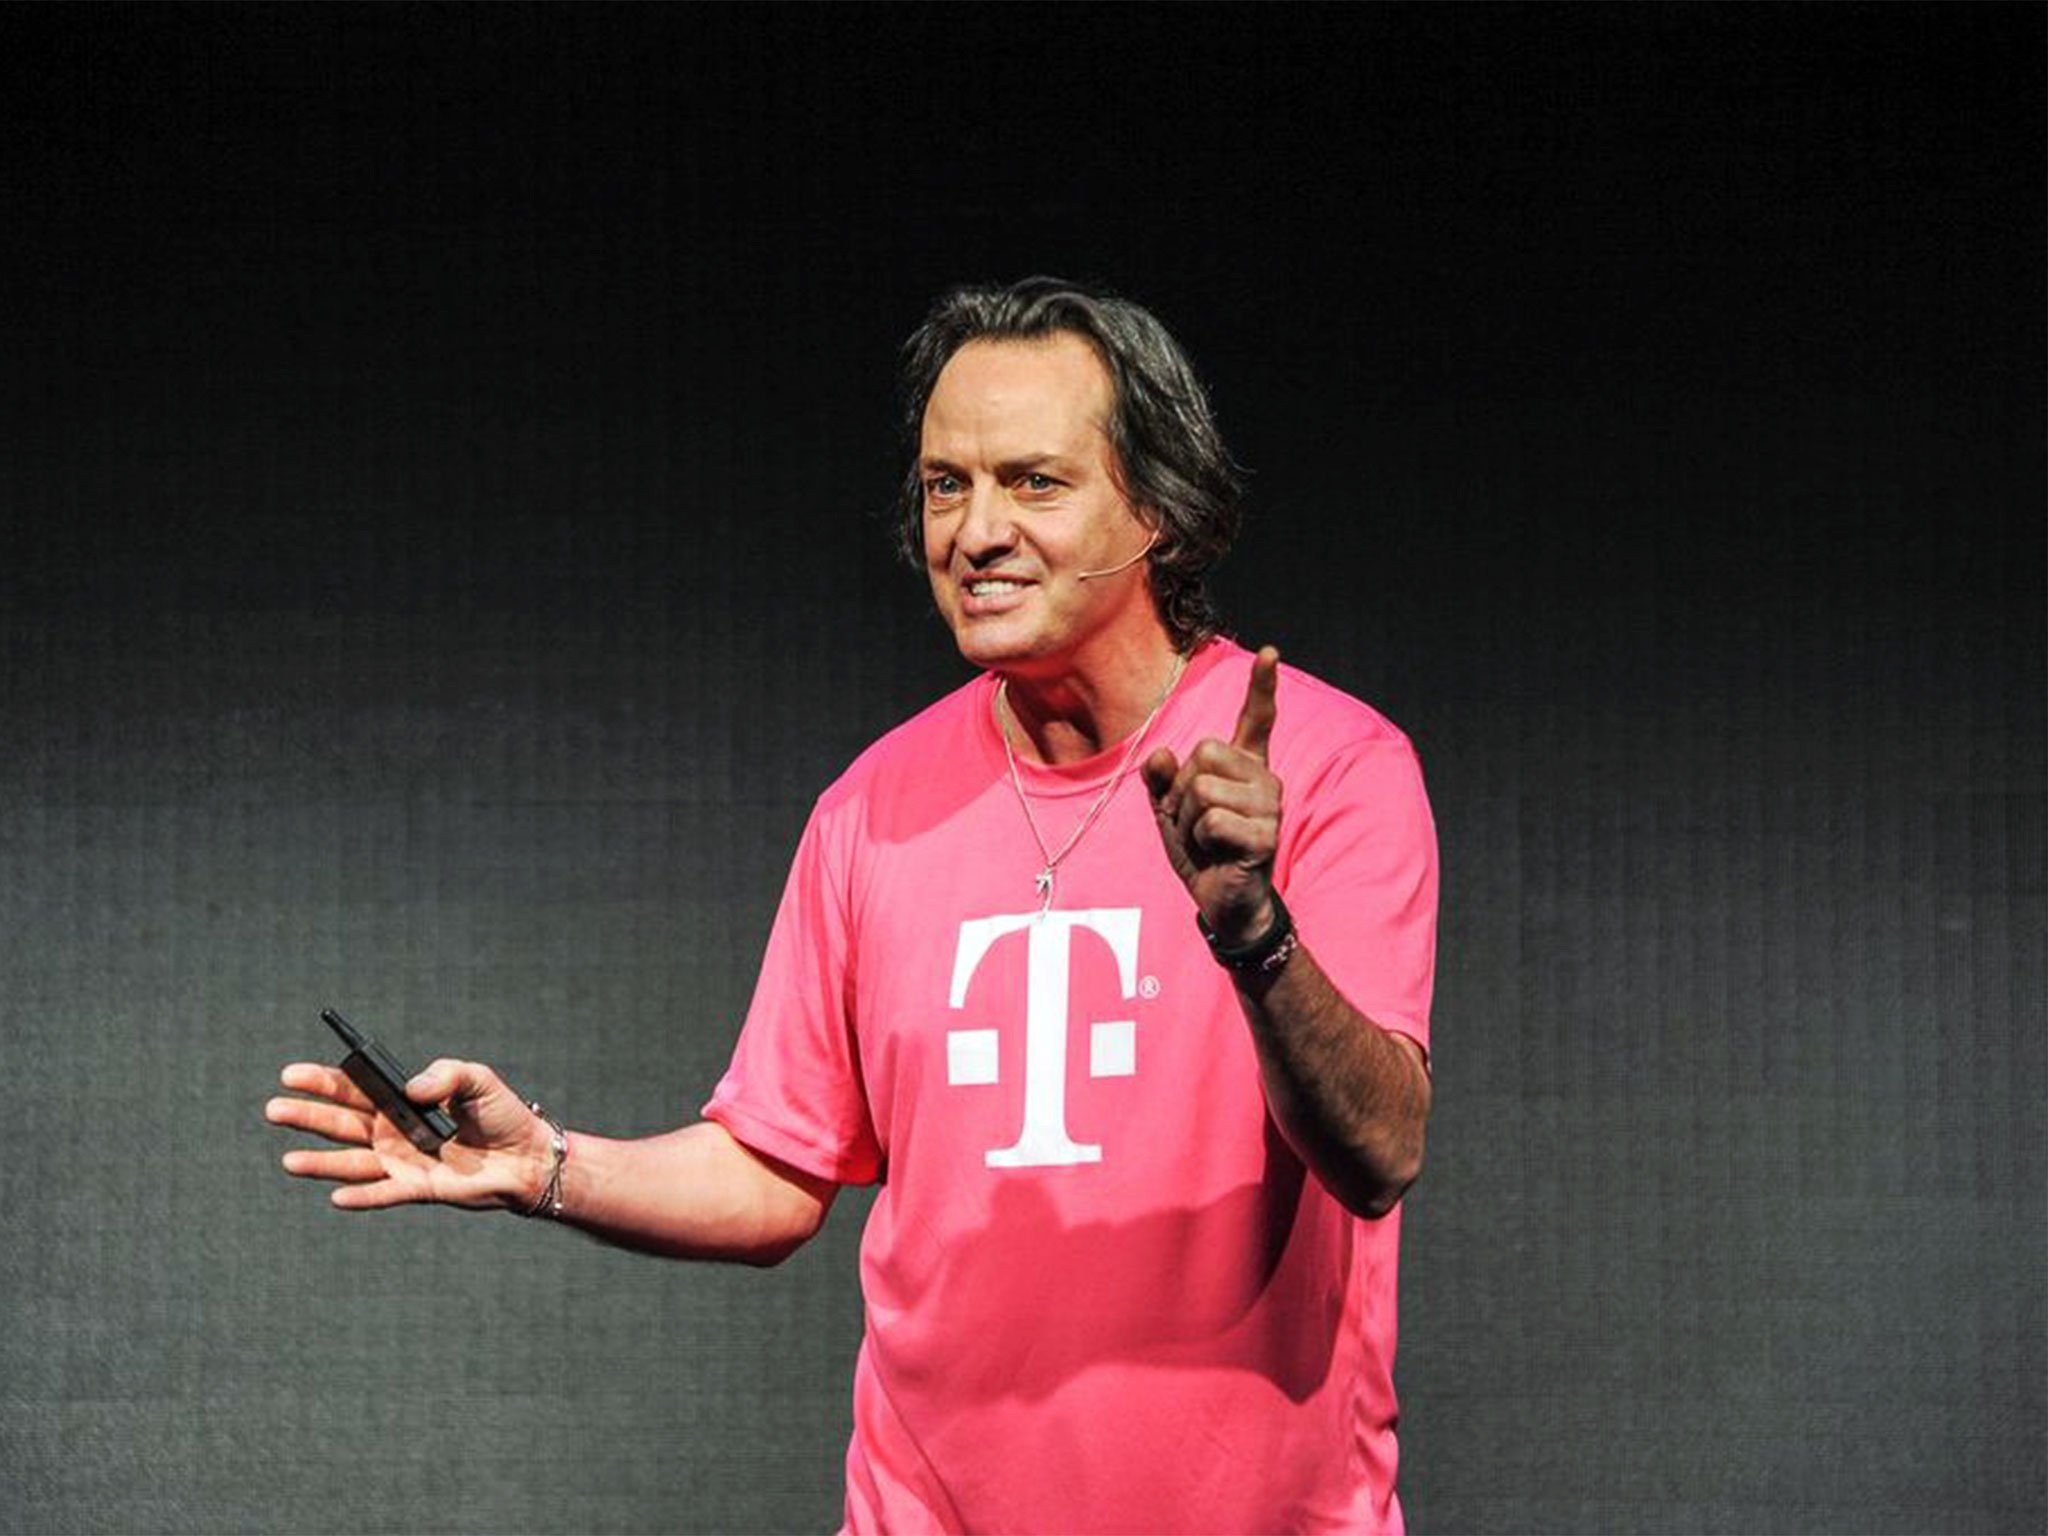 Hey T-Mobile, let's cut the trash talk and stick to business